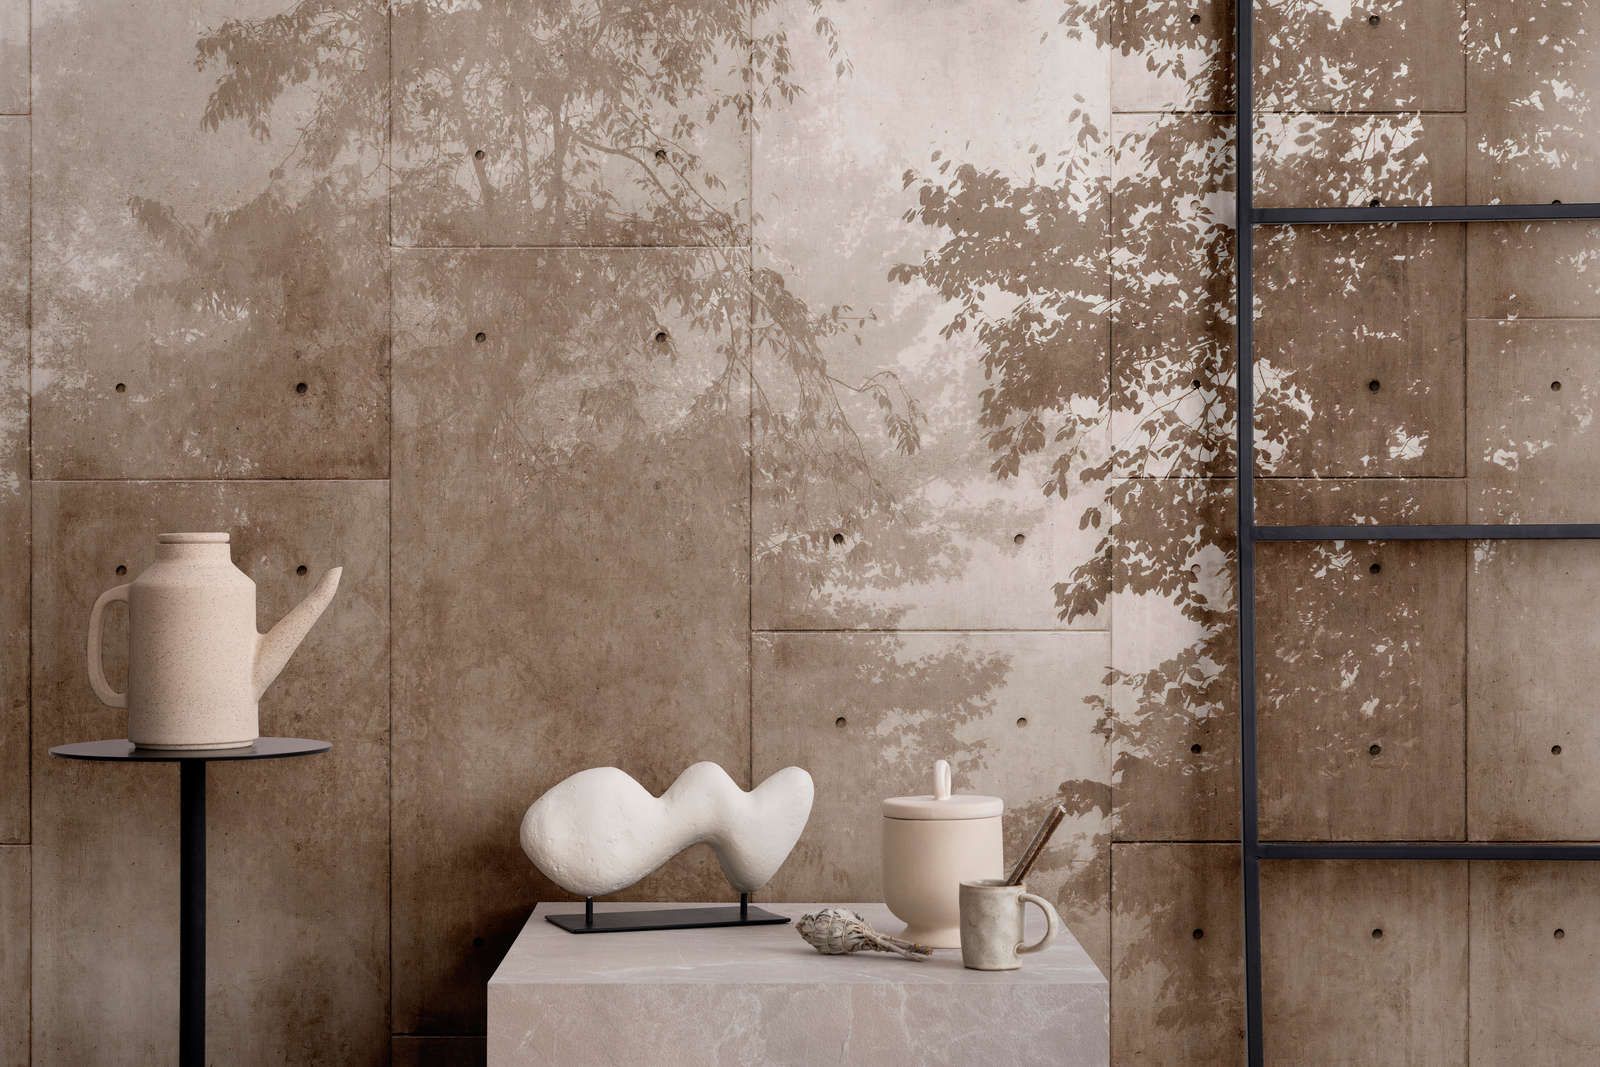             Photo wallpaper »mytho« - Treetops on concrete slabs - Lightly textured non-woven fabric
        